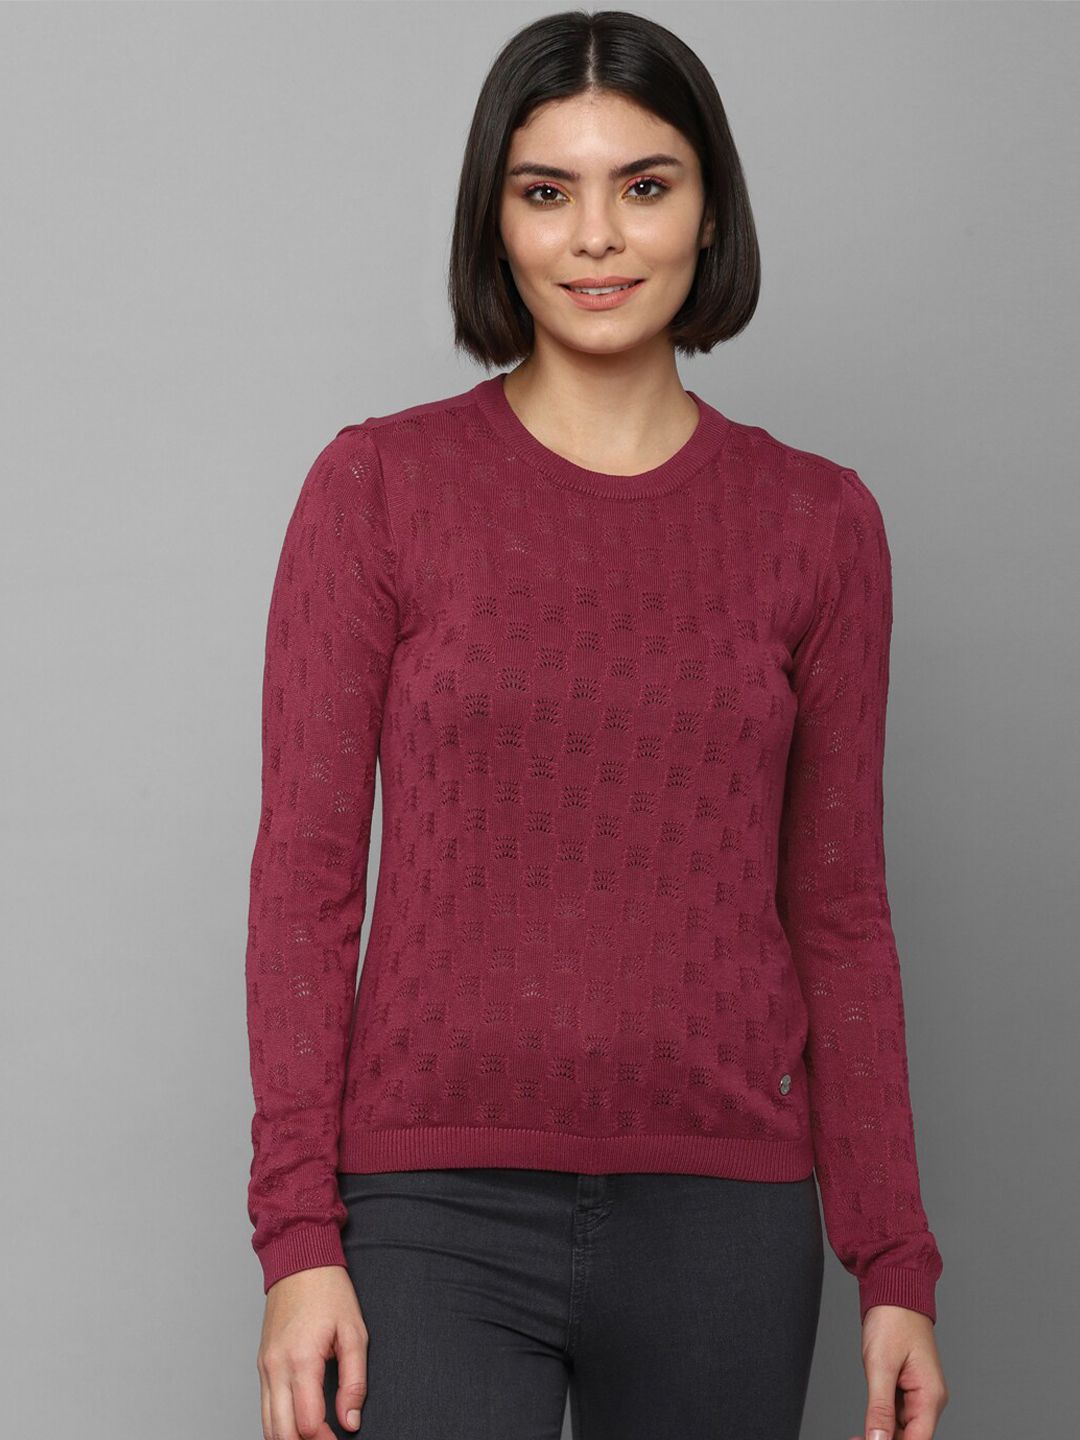 Allen Solly Woman Purple Top Price in India